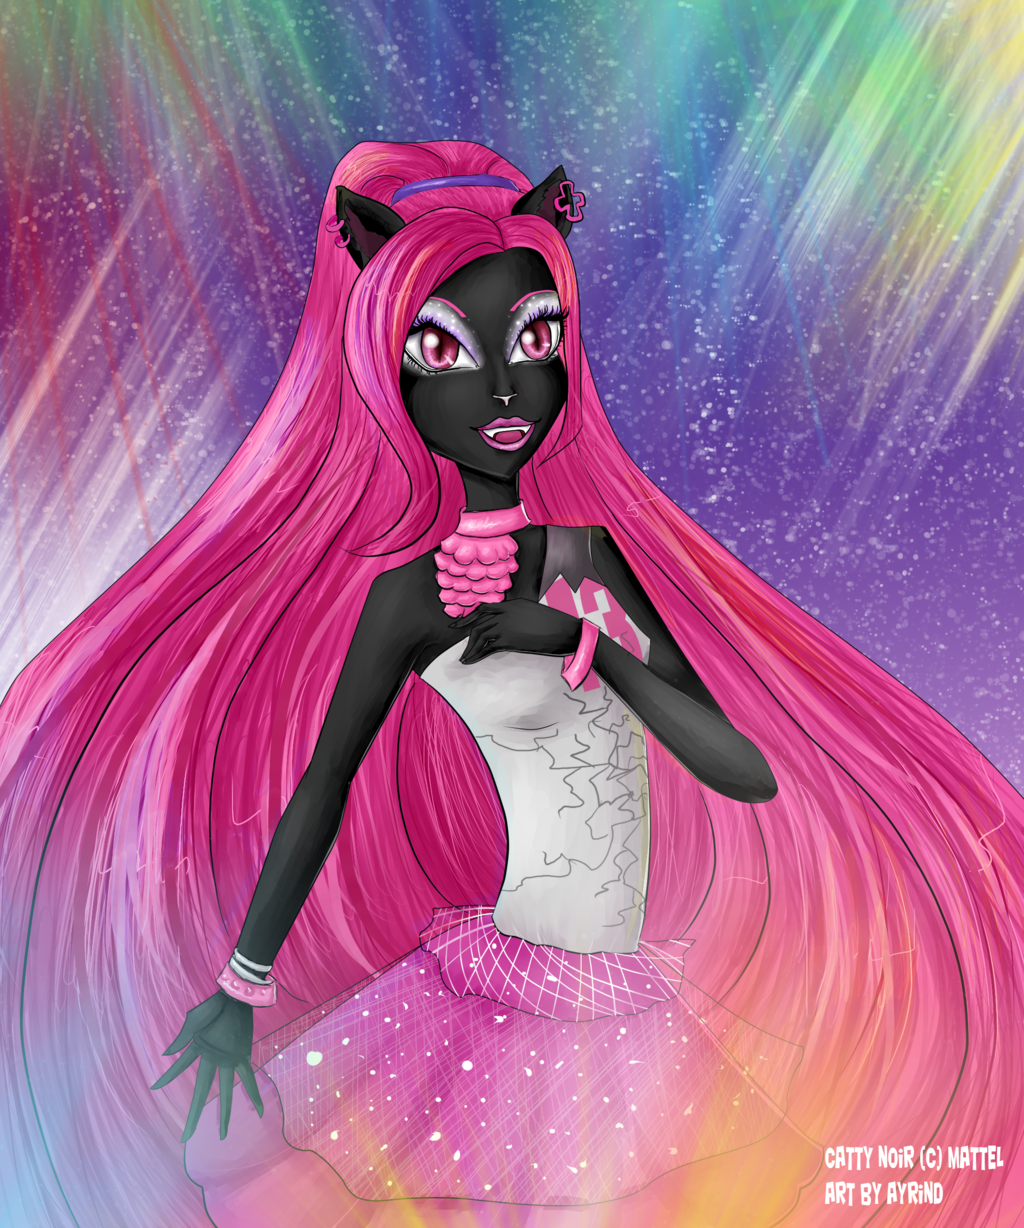 Monster High: Catty Noir. Monster high, Monster high characters, Monster high ghoulia